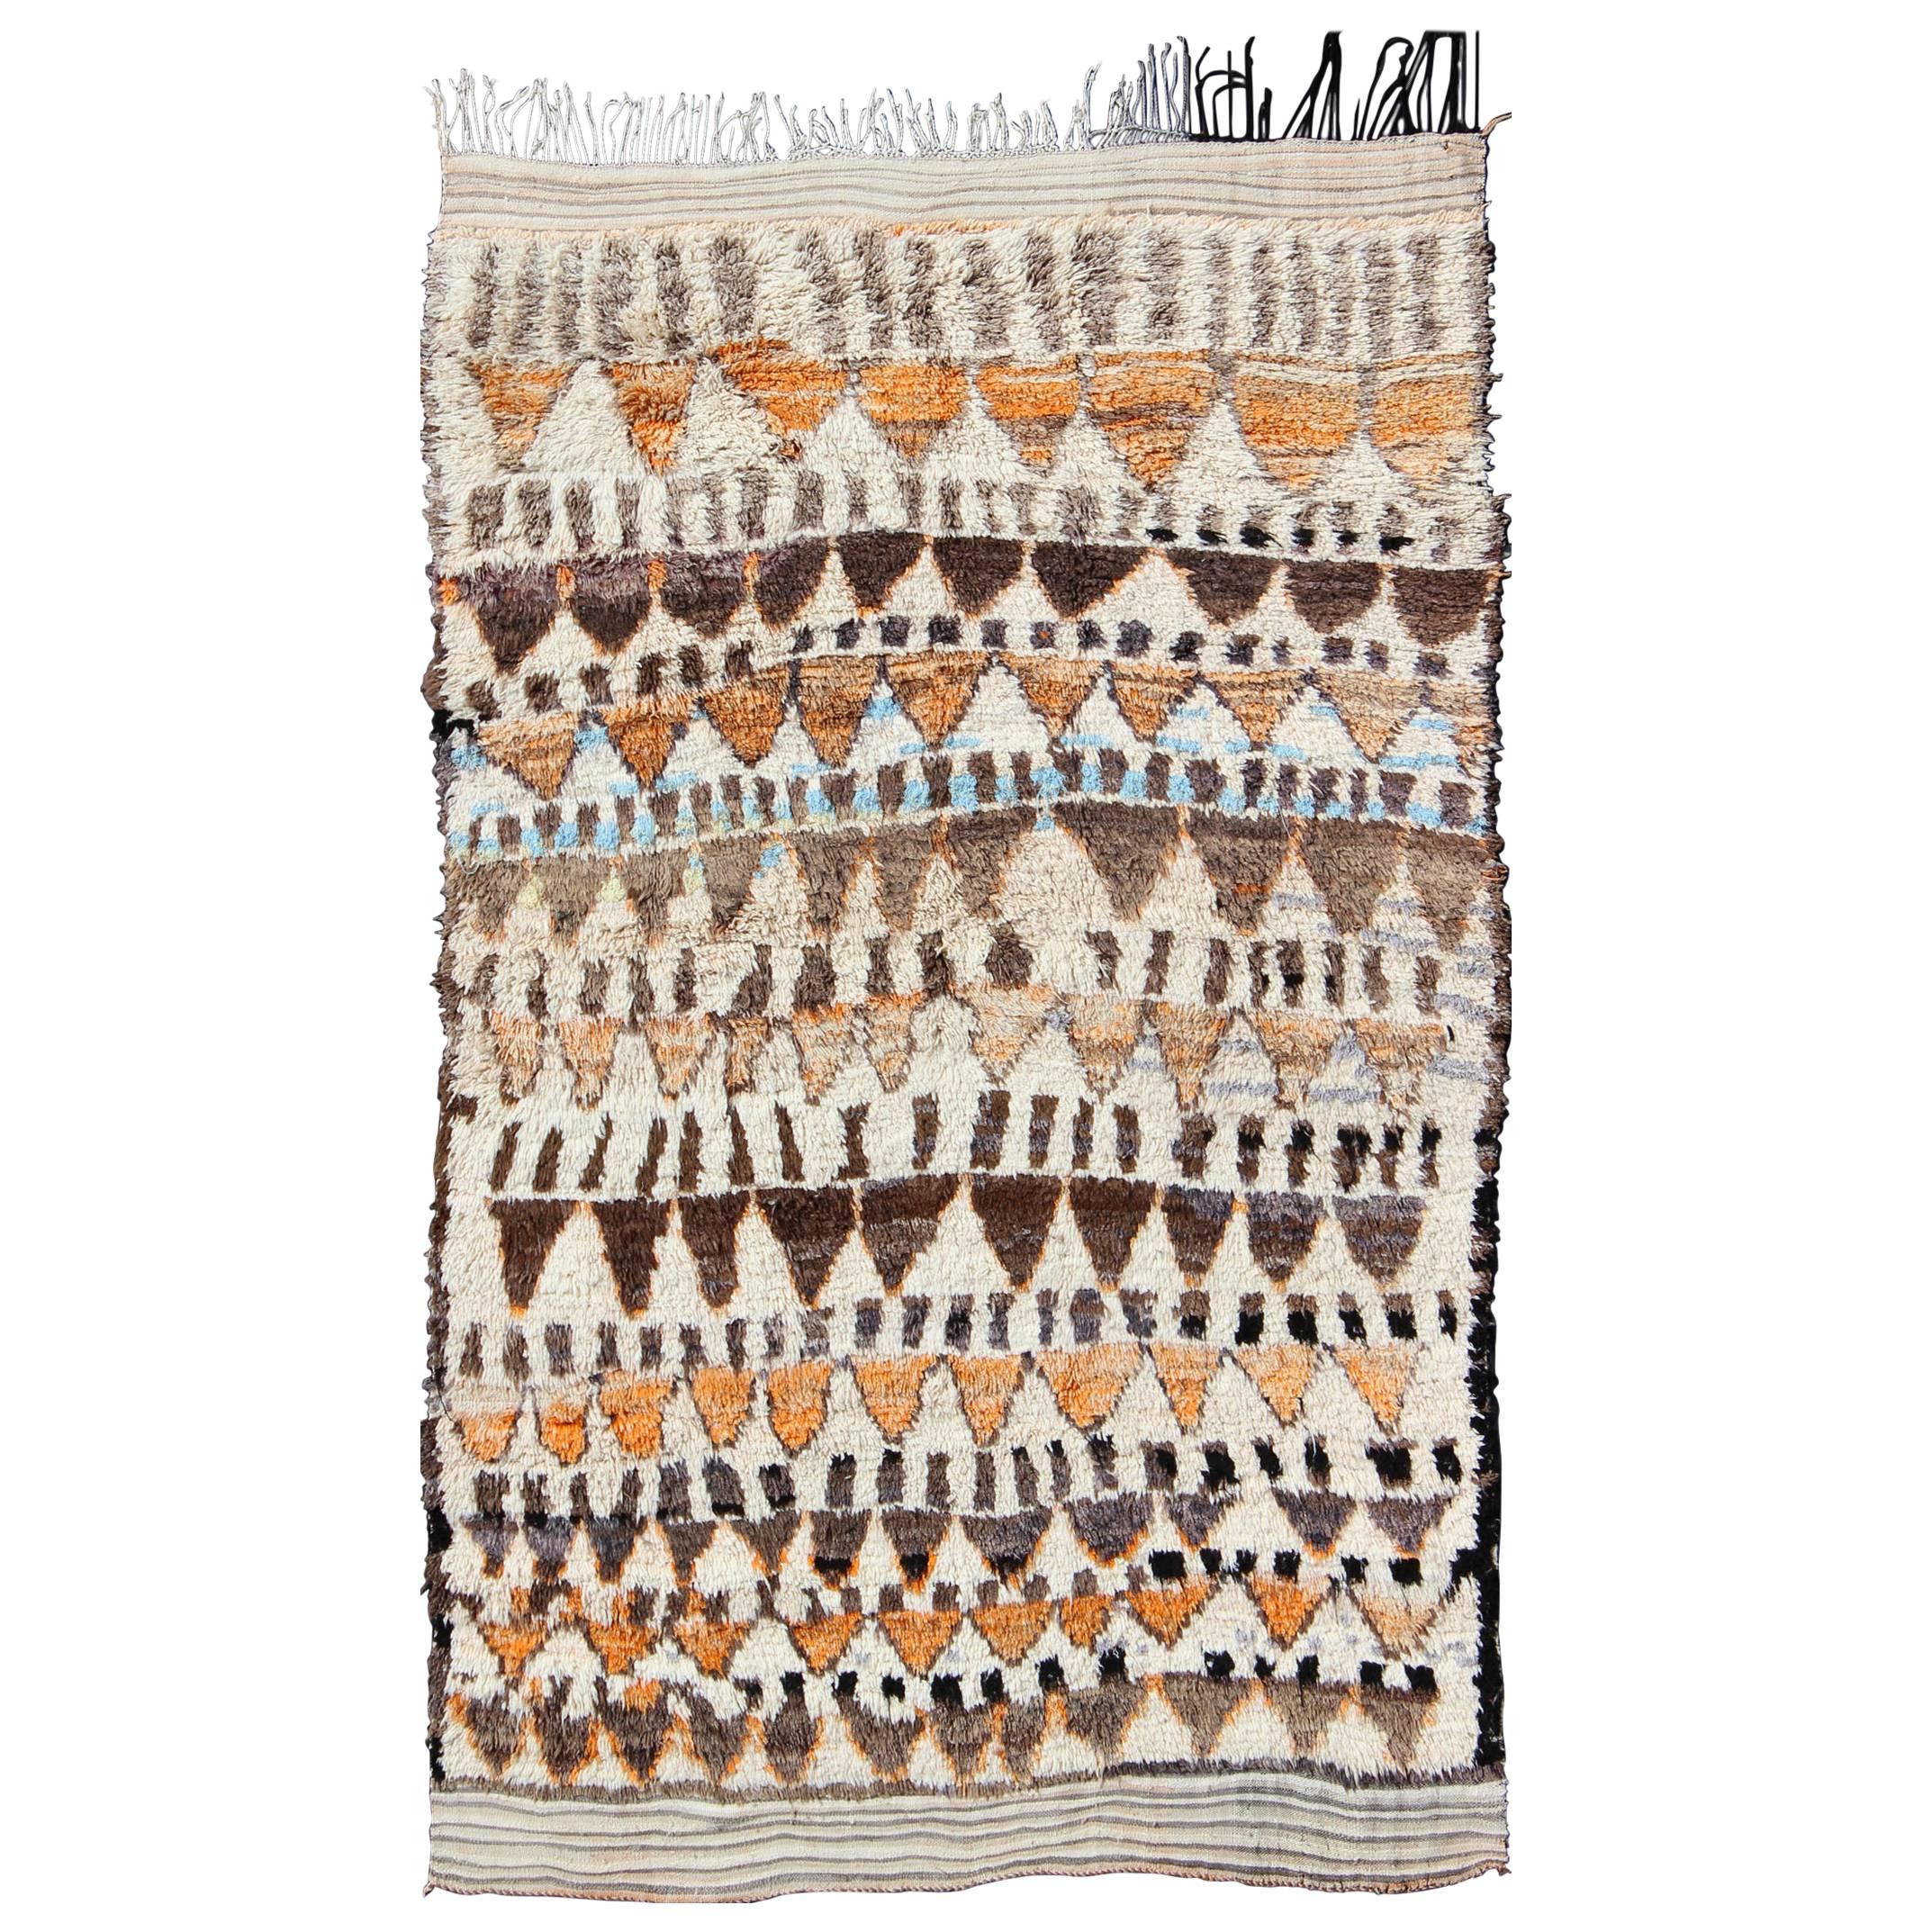 Vintage Moroccan Azilal Rug in Natural Creams, Browns and Muted Orange